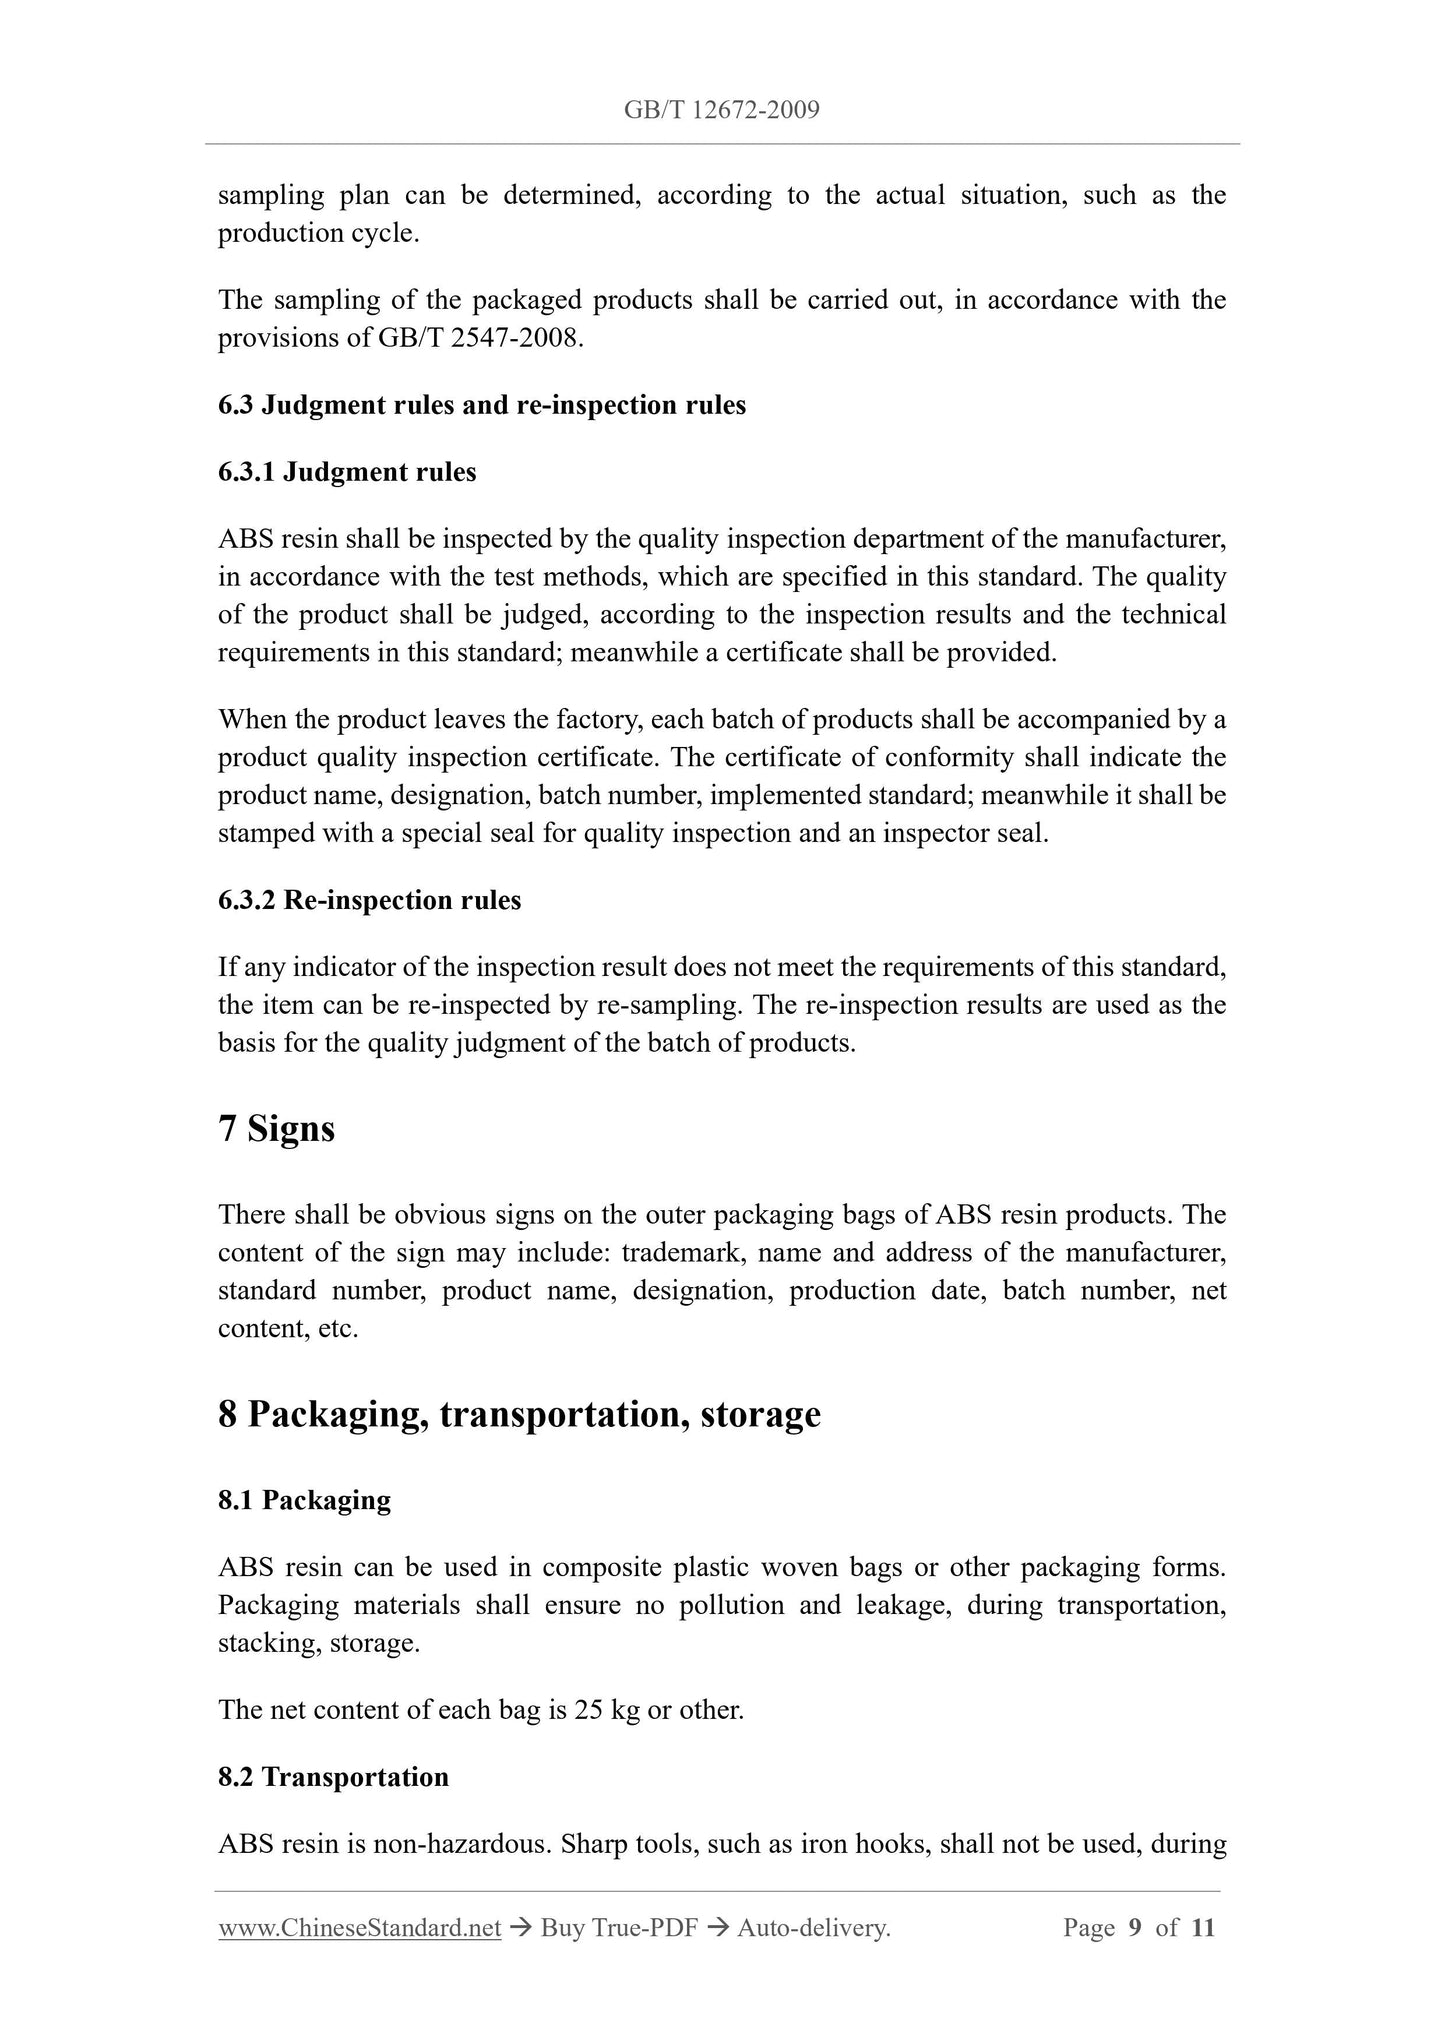 GB/T 12672-2009 Page 6